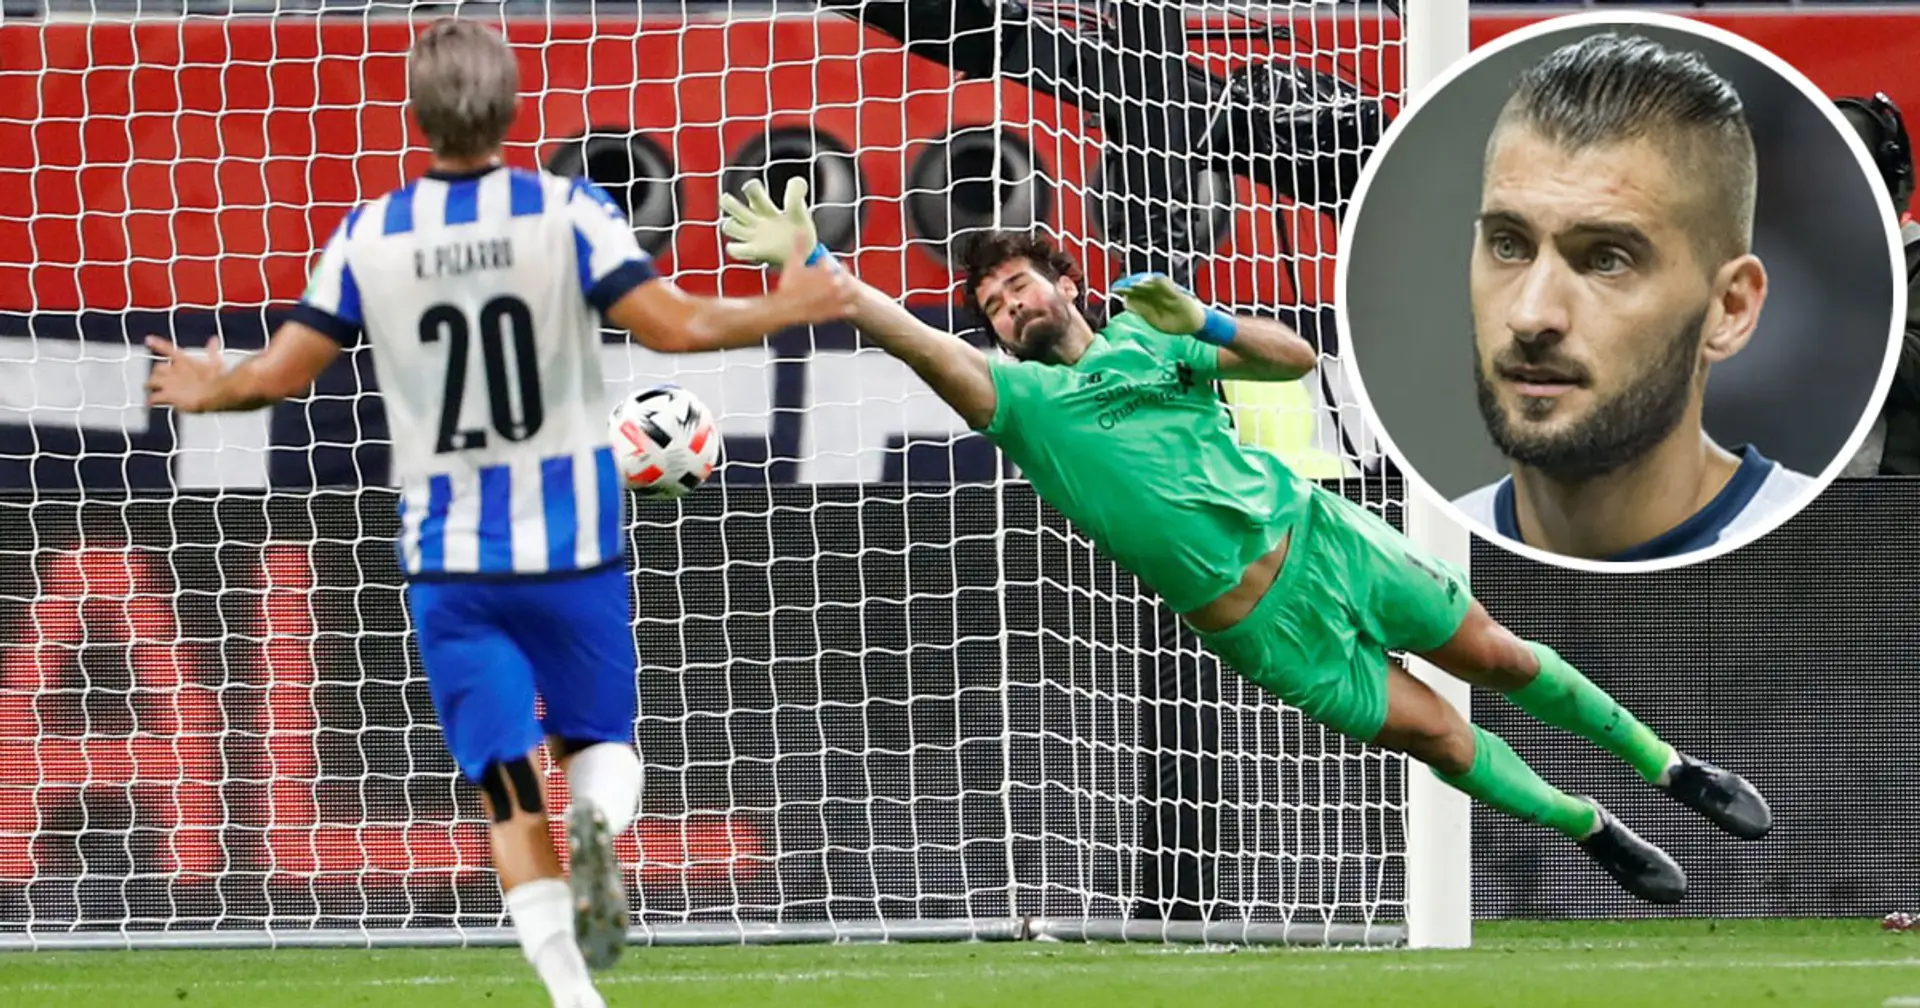 'We didn’t score the second because of the animal in their goal': Monterrey defender Sanchez can't hide admiration for Alisson despite CWC frustration